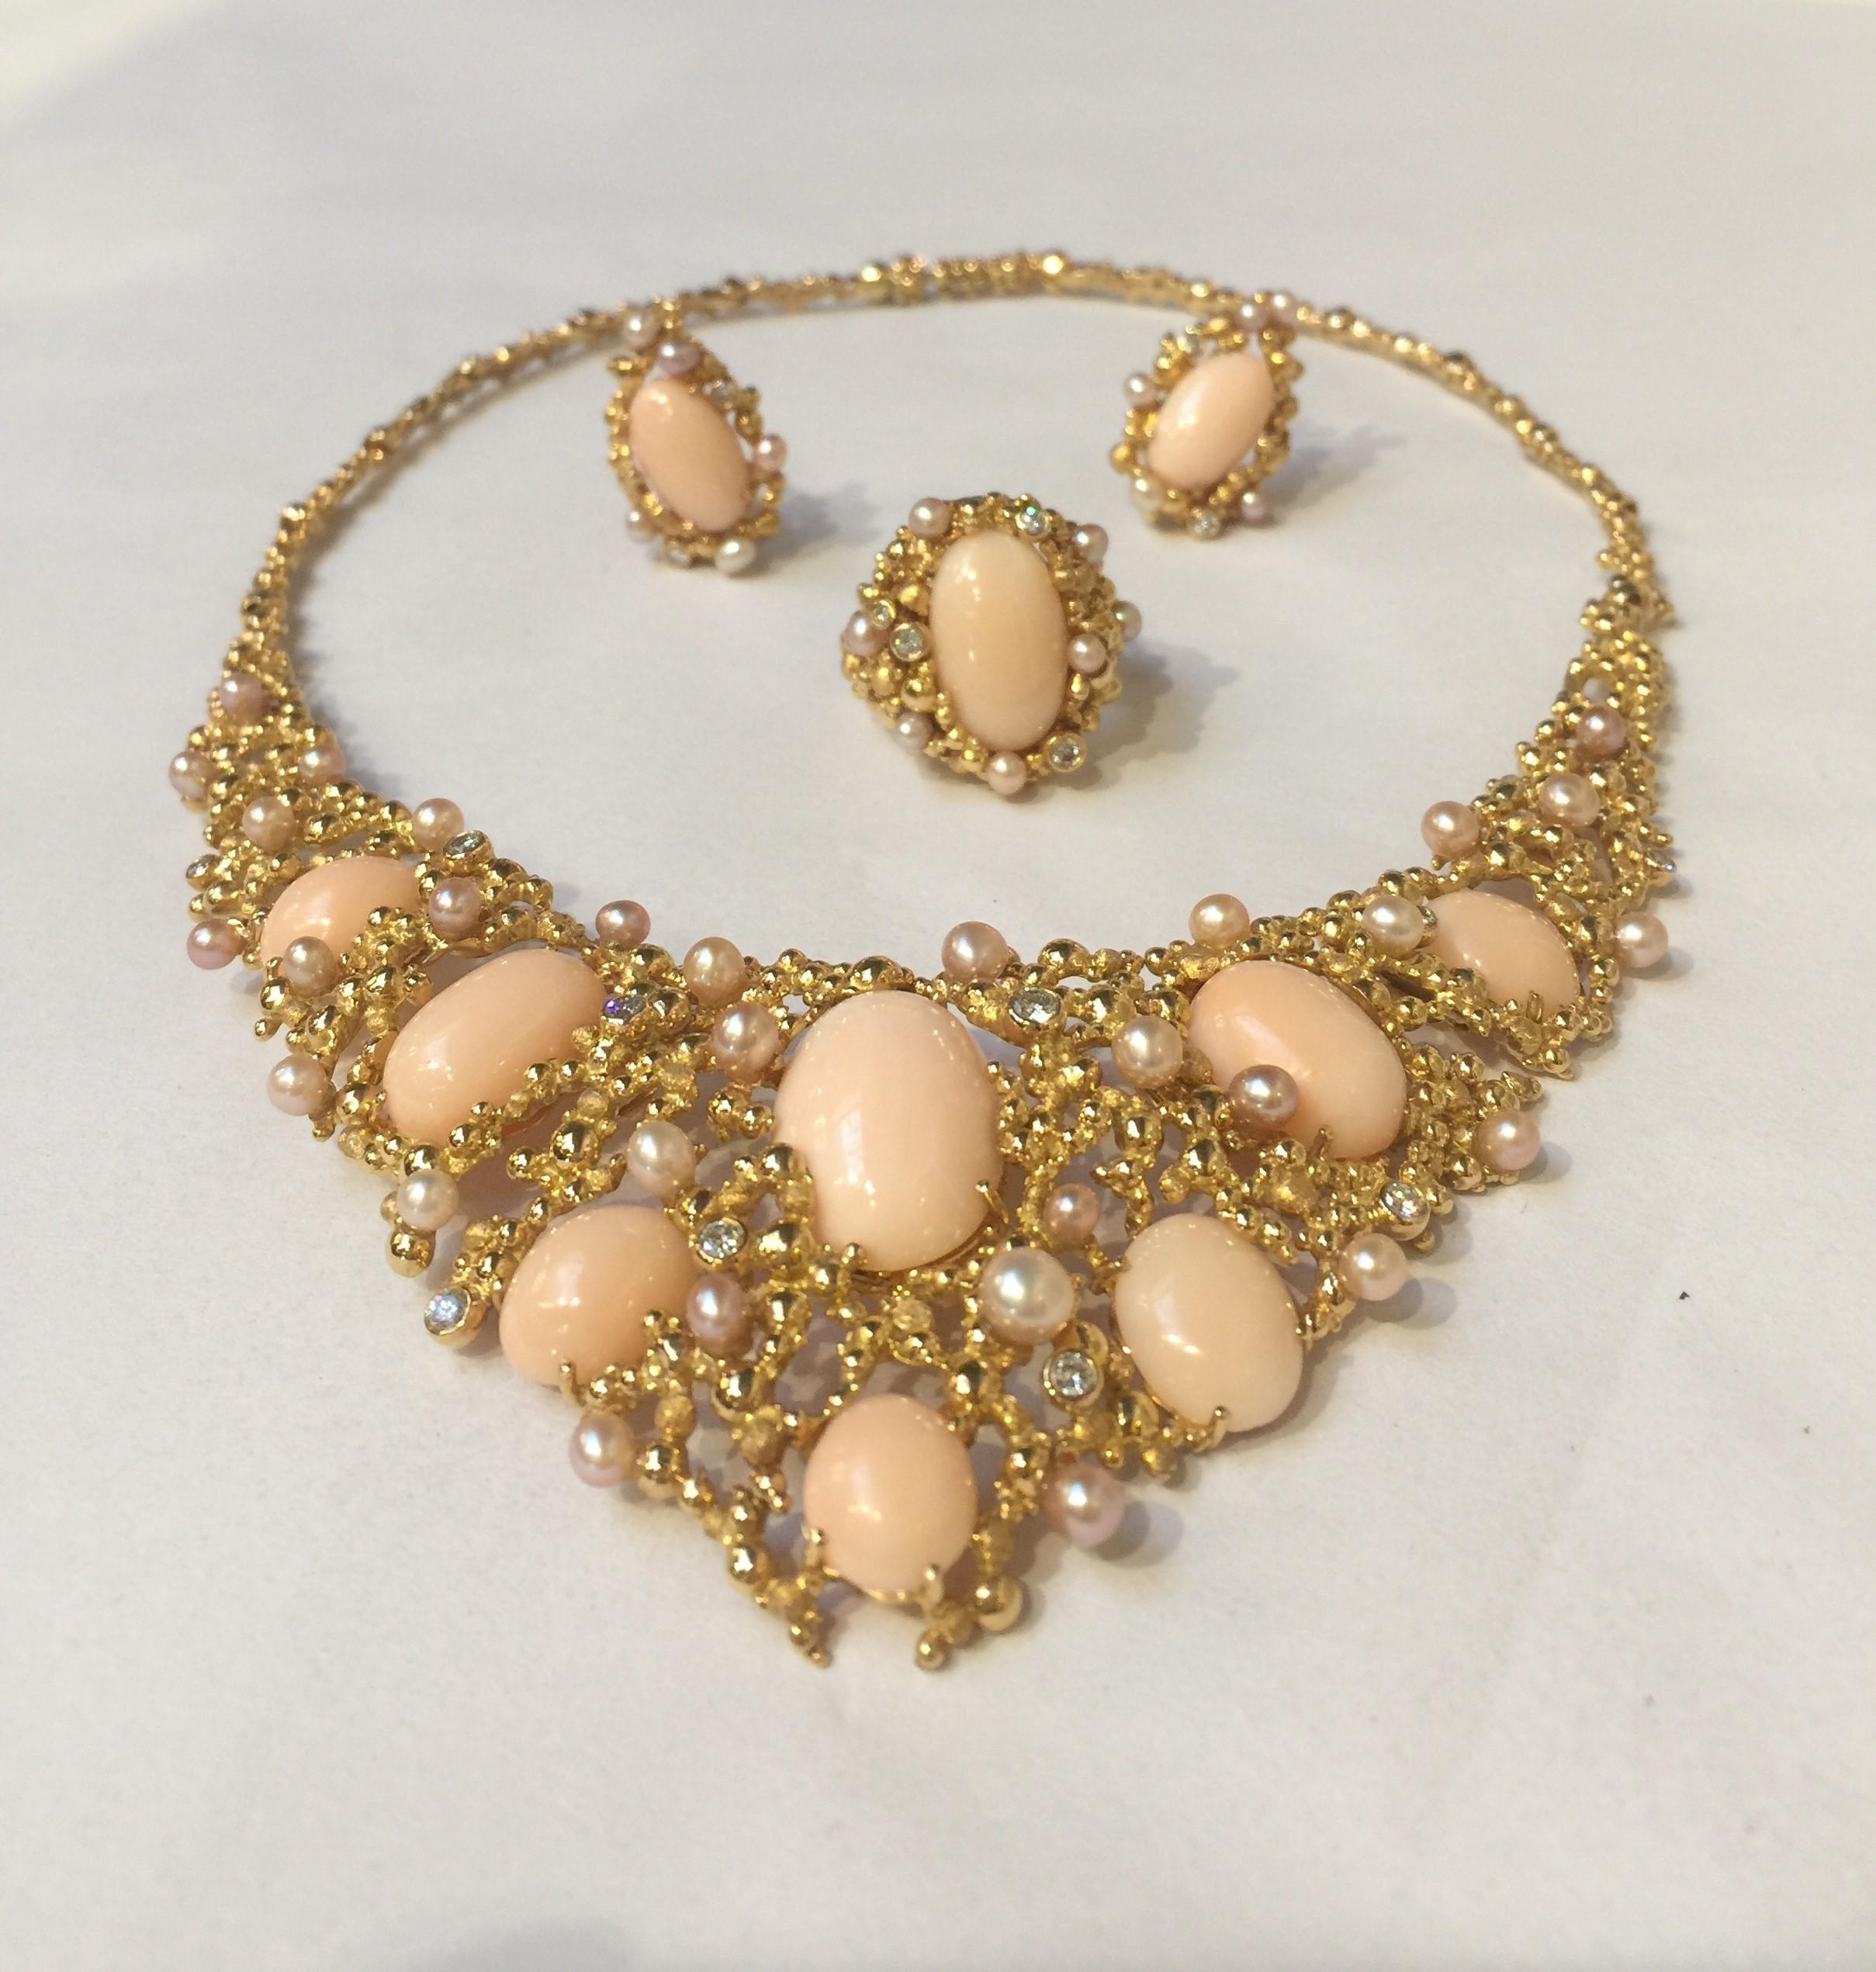 A fantastic jewelry suite by legendary Swiss jeweler Gilbert Albert, of pink angel skin coral, cultured pearls, and diamonds, all set in 18k yellow gold. The suite comprising of a large bib necklace with matching ring (size 7) and earclips. 

The